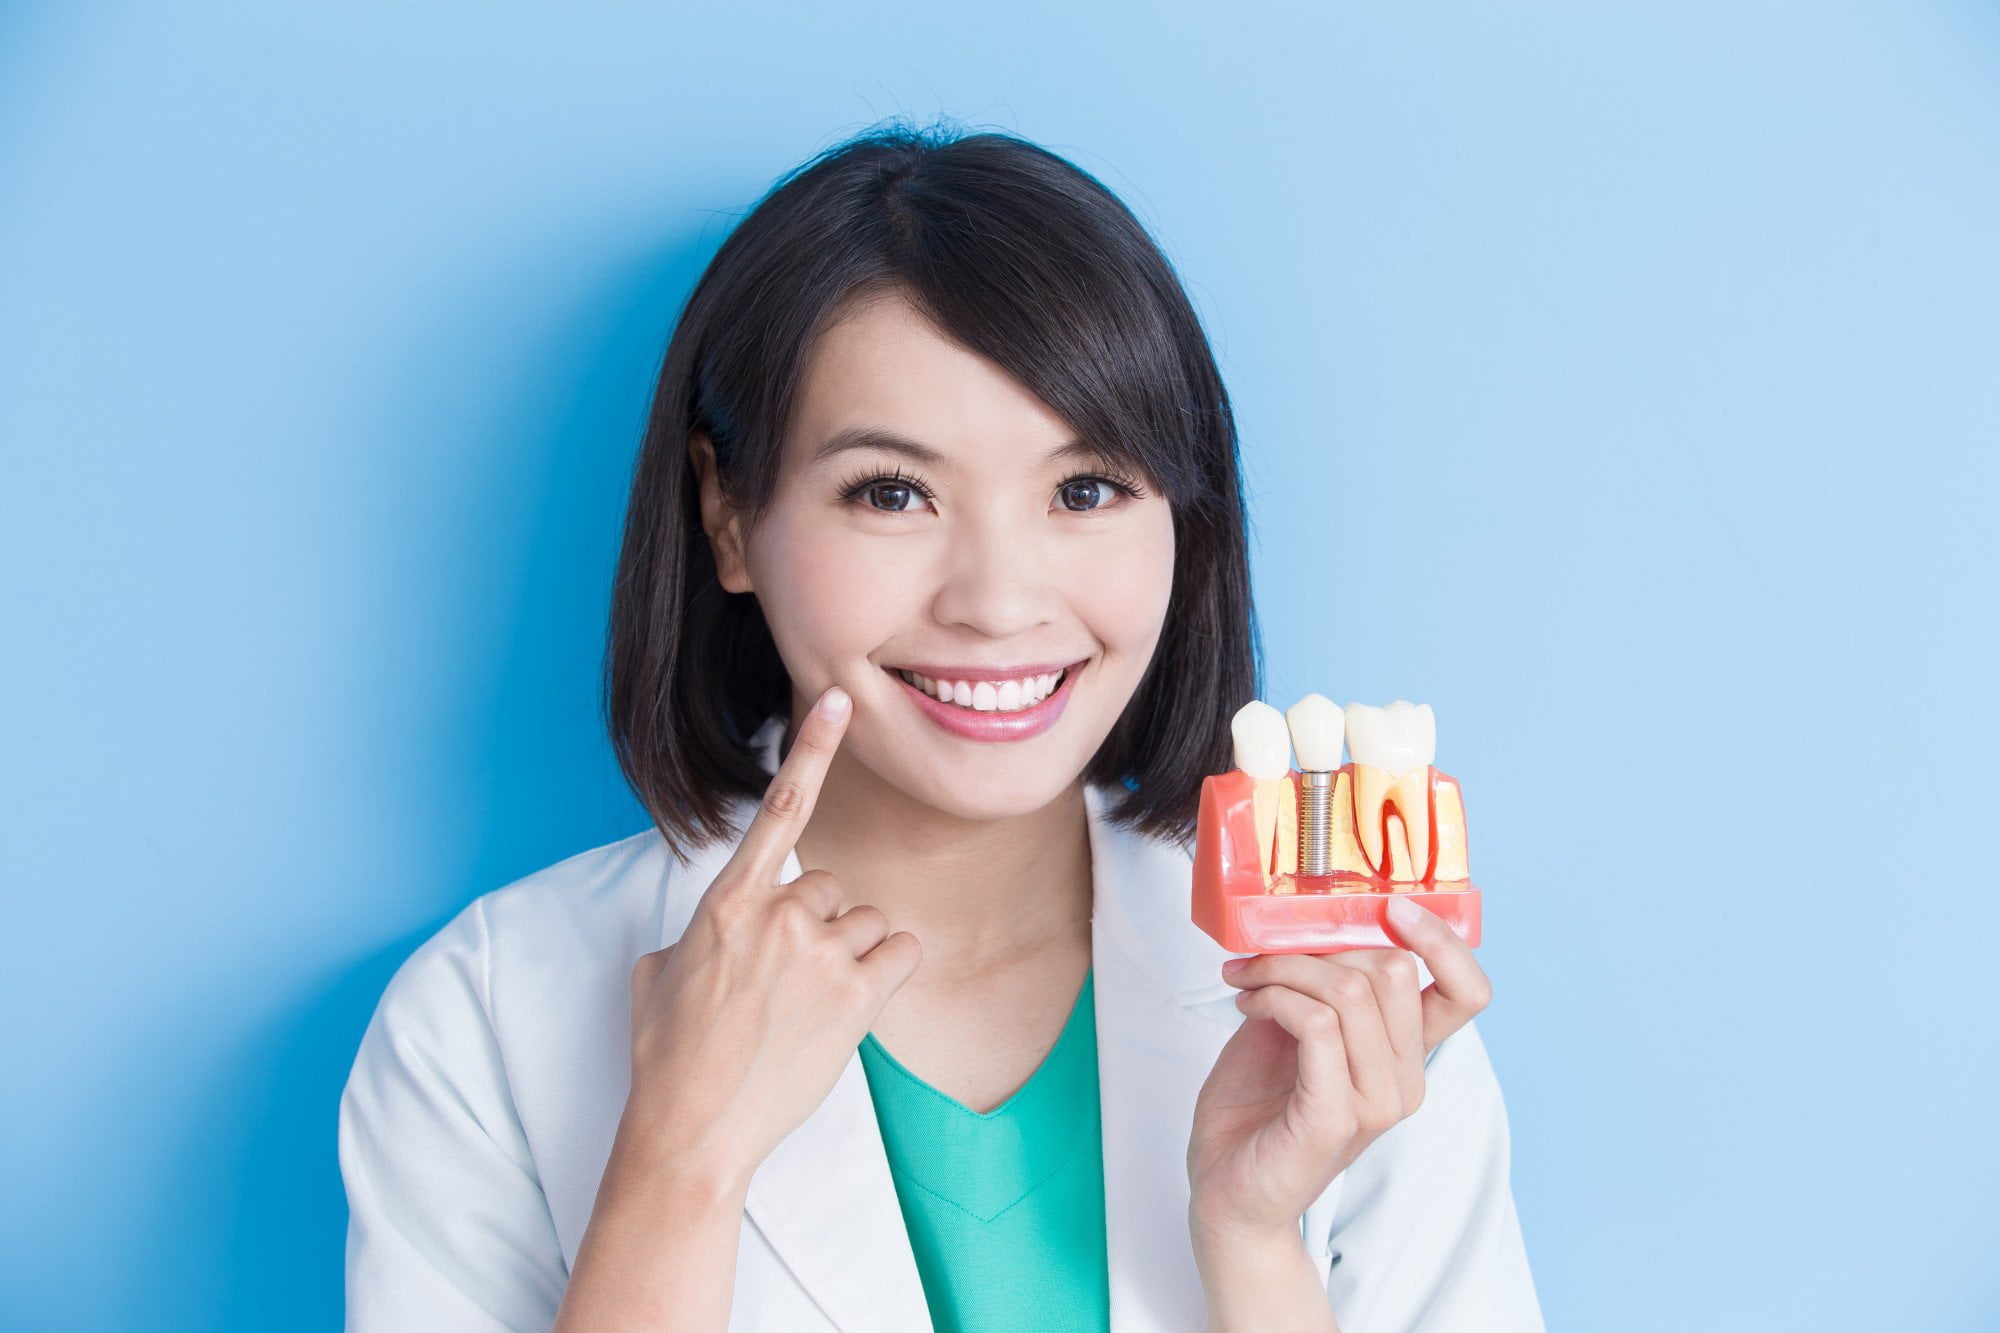 Dental implants are a popular option when it comes to tooth replacement, but what are the pros and cons of them? Here we cover everything you need to know.